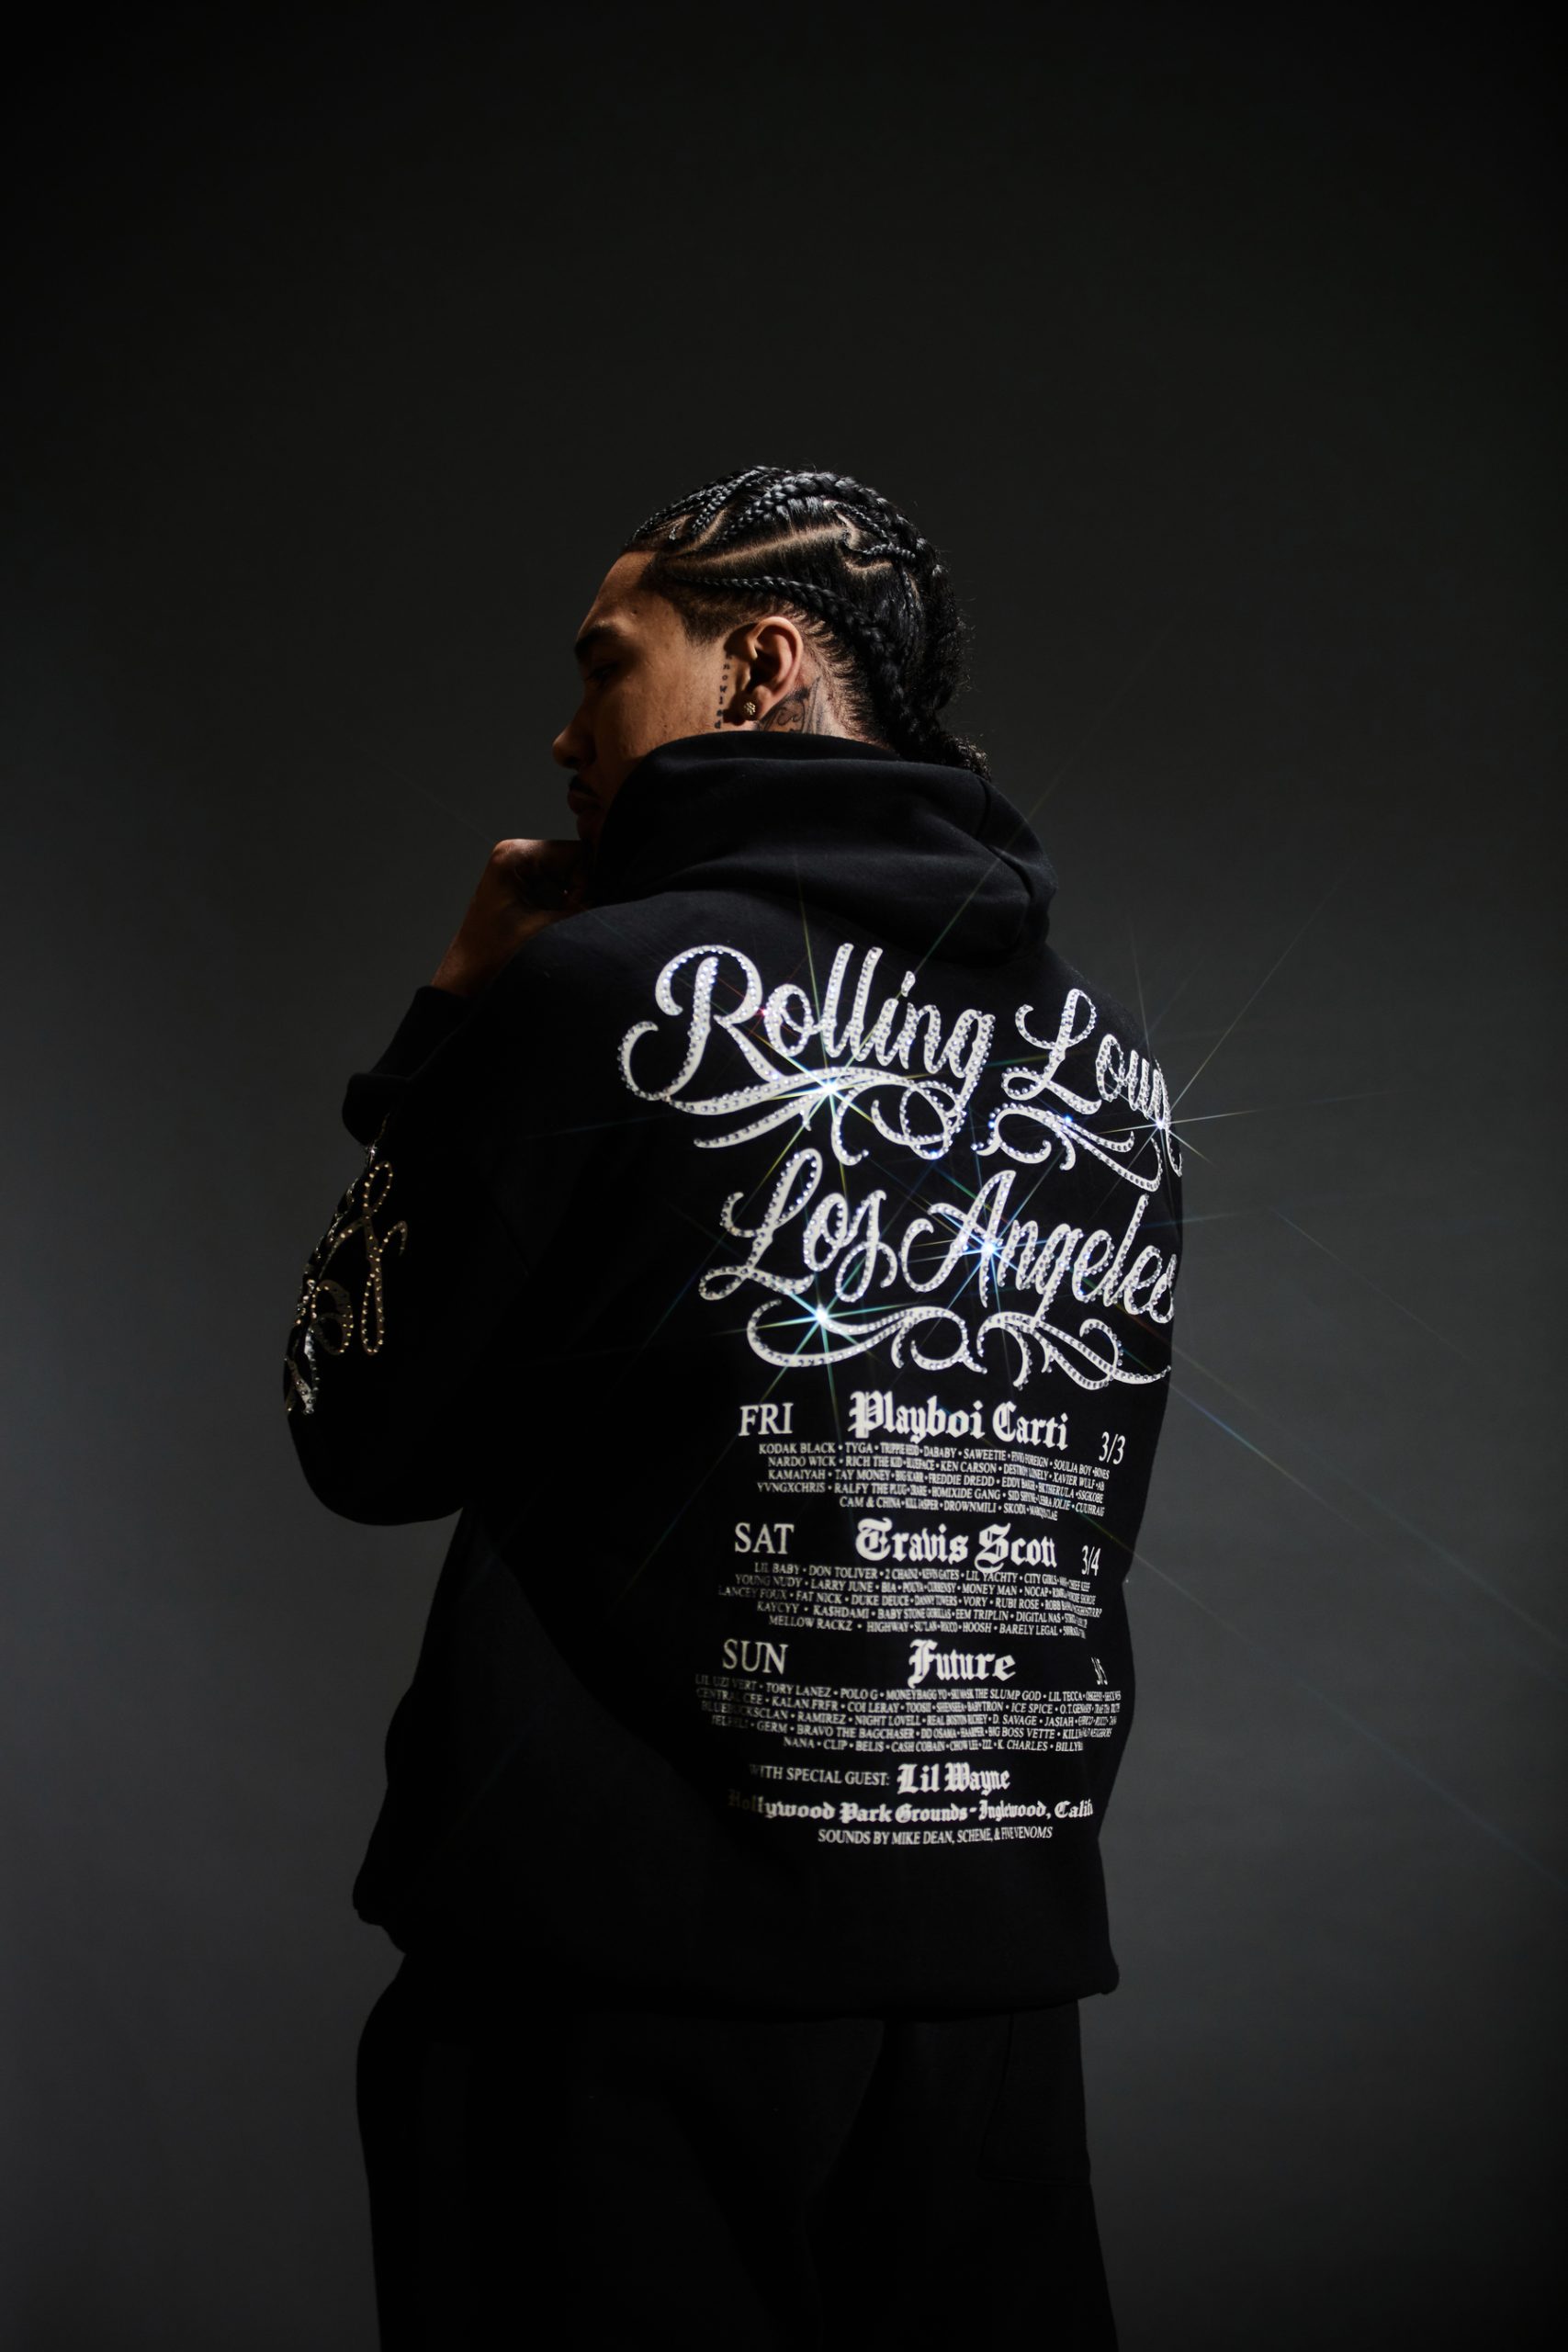 Rolling Loud California Announces Merch, Including Collabs w/ Born X